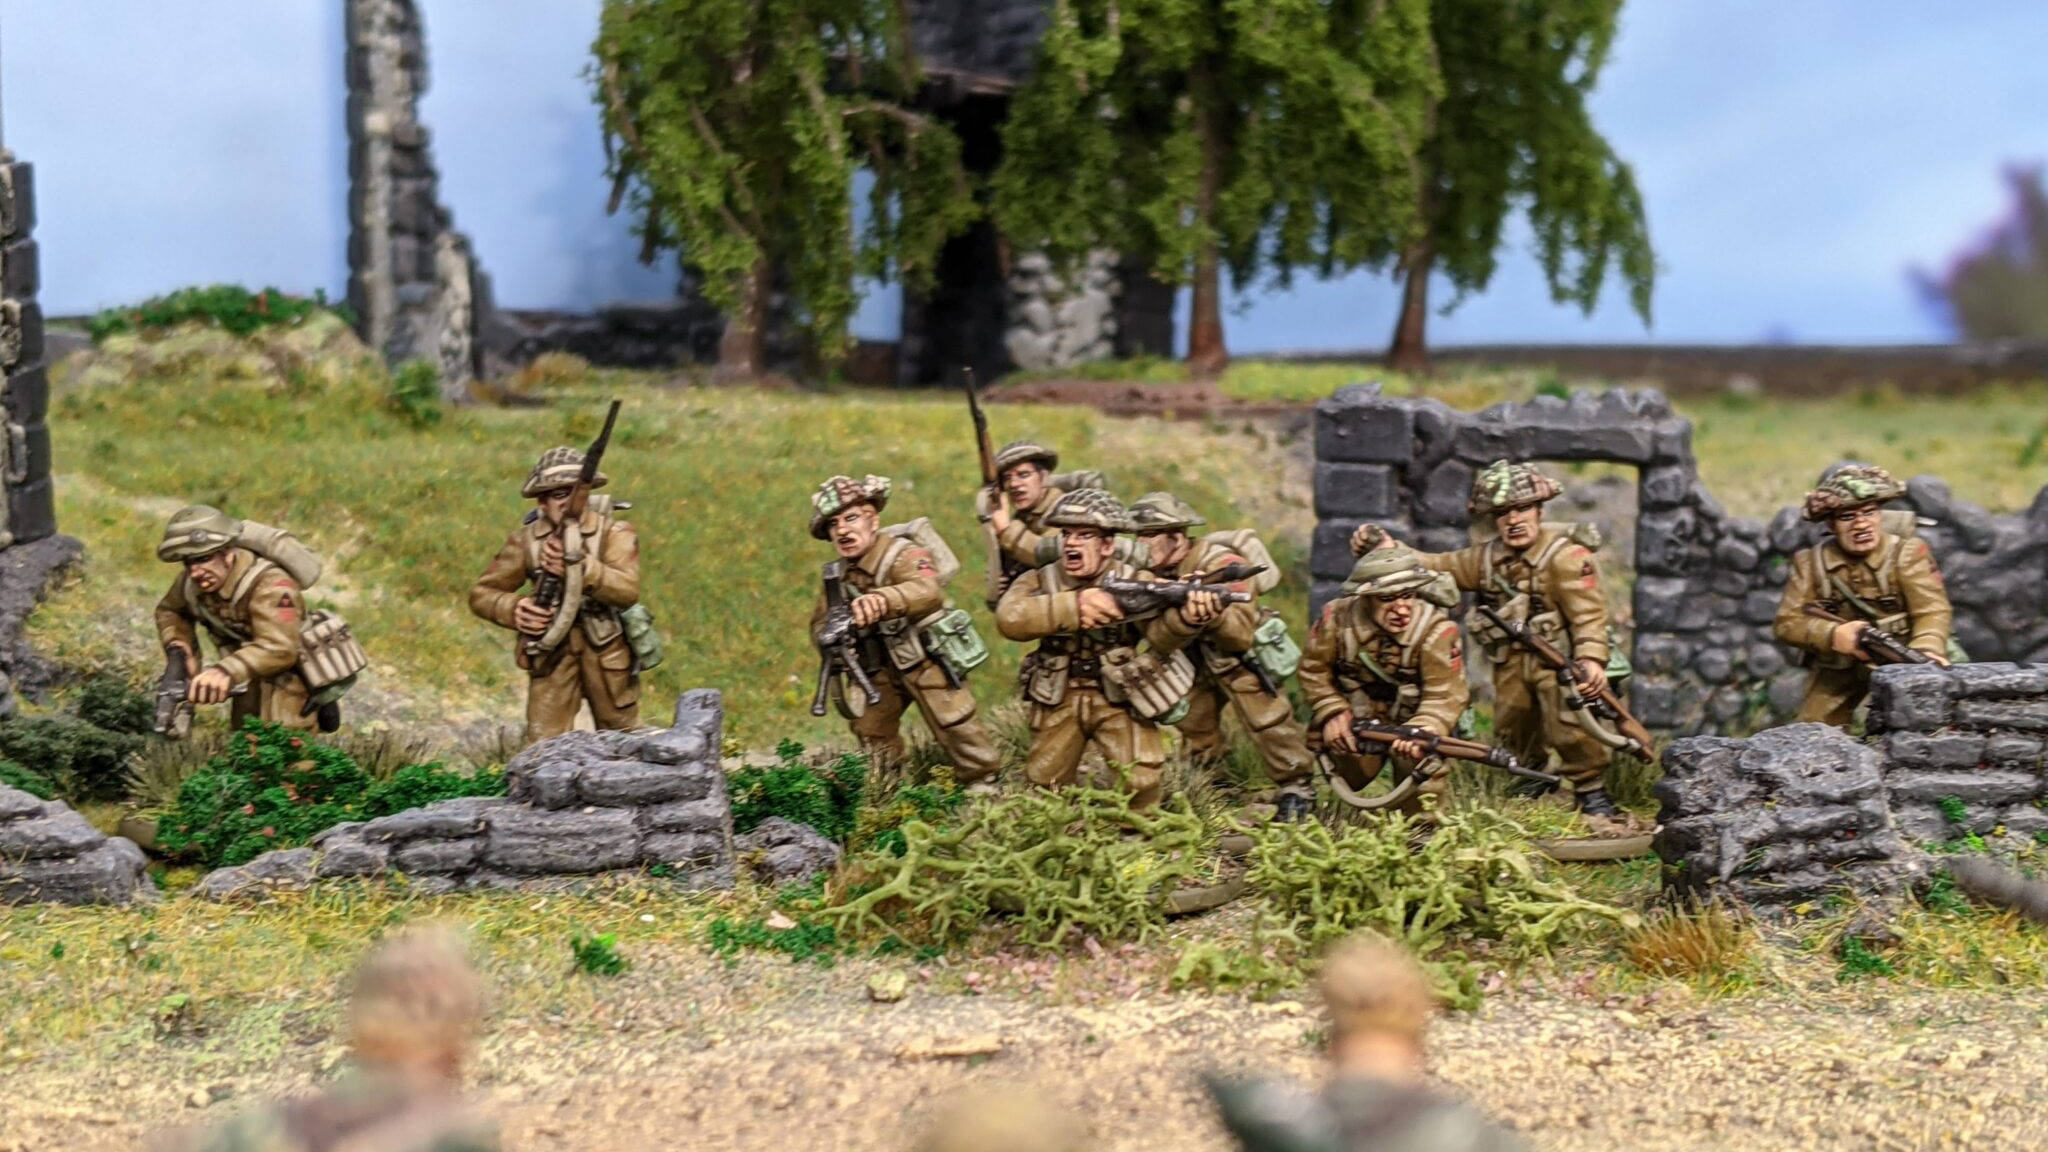 Bolt Action gets new British & Canadian starter army kit